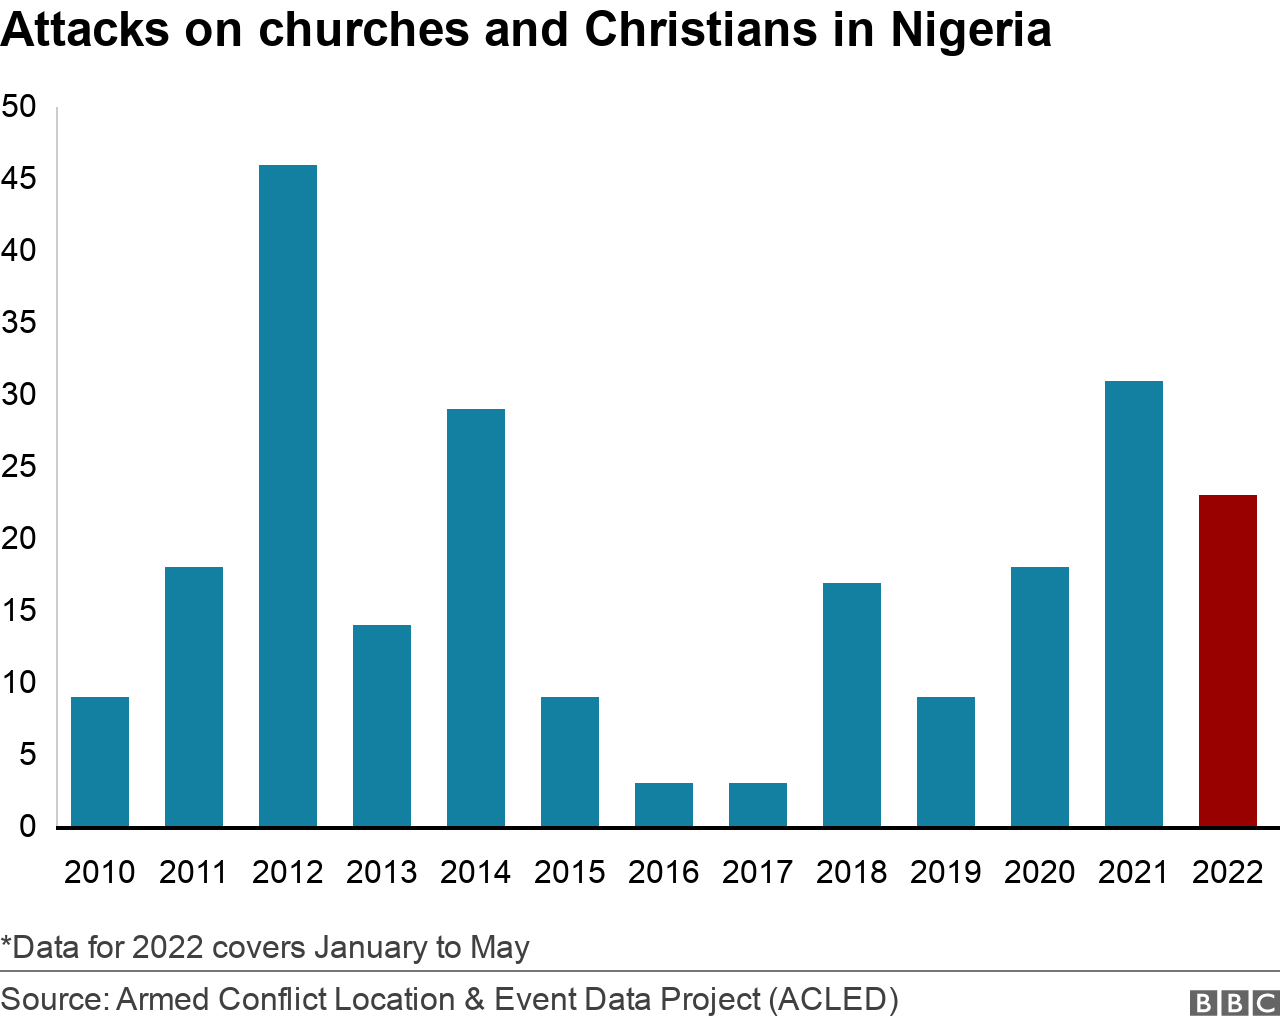 Chart showing attacks on churches and Christians in Nigeria from 2010